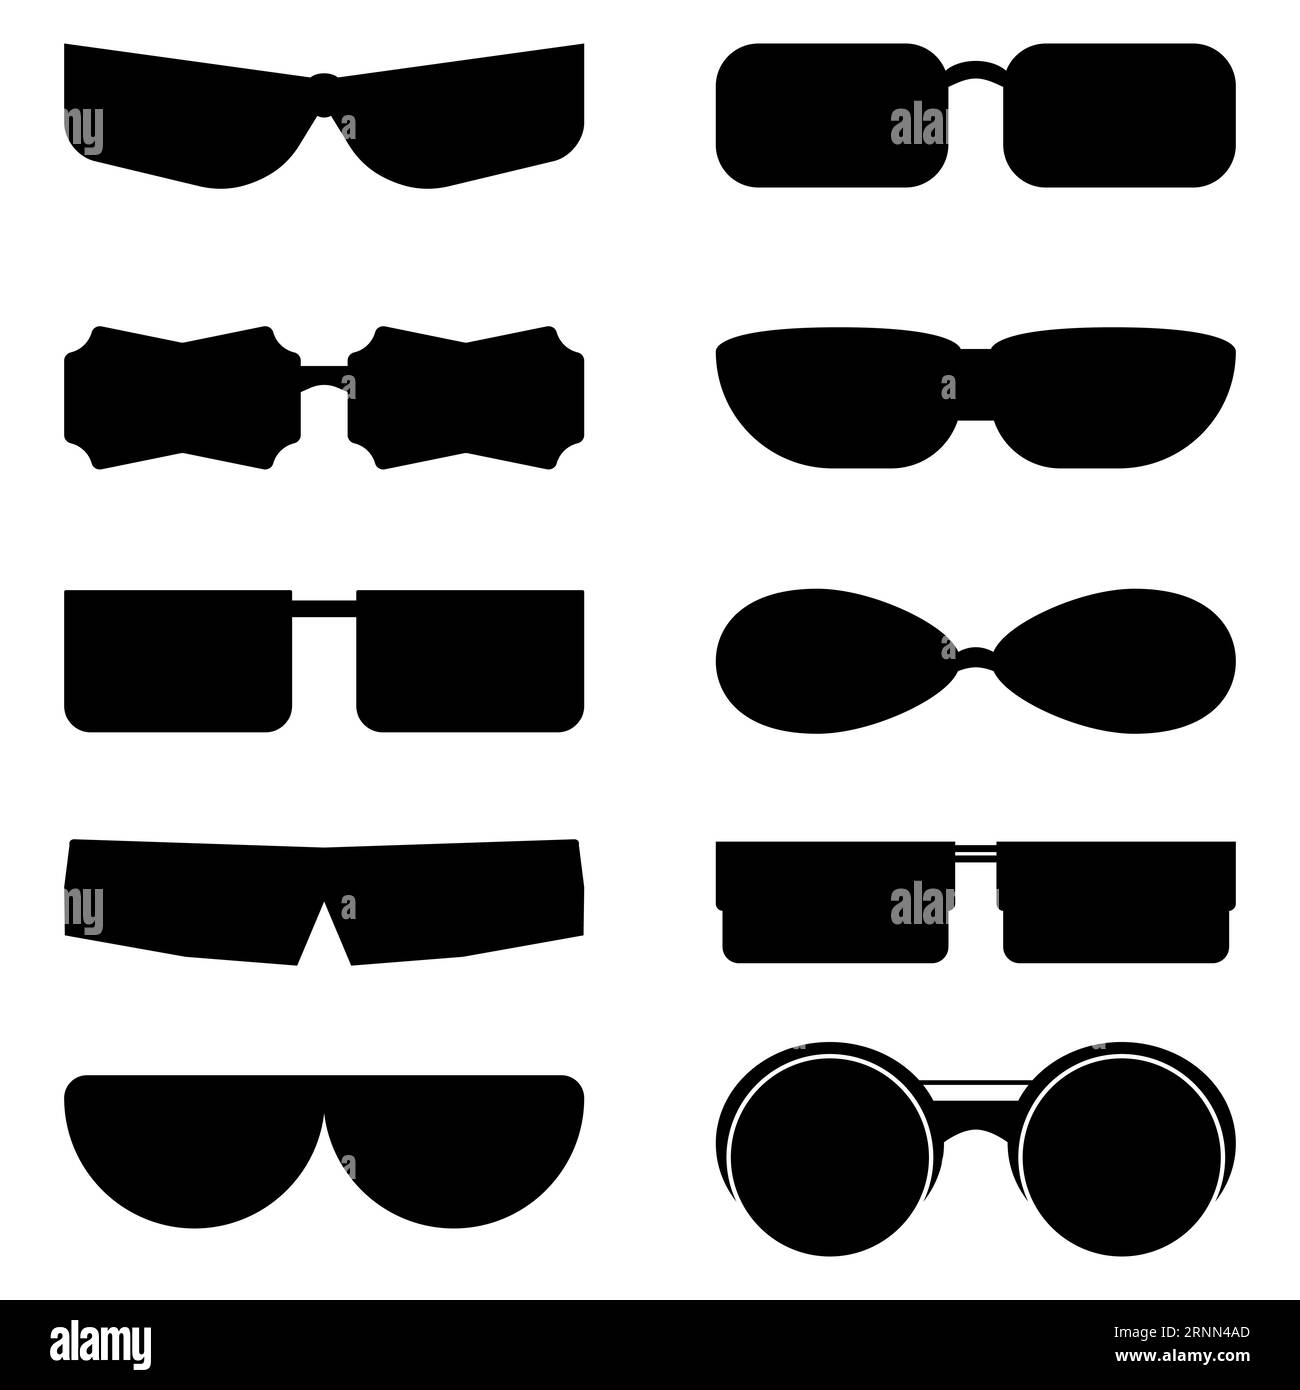 Set of silhouettes of black glasses with different lenses. Stock Vector